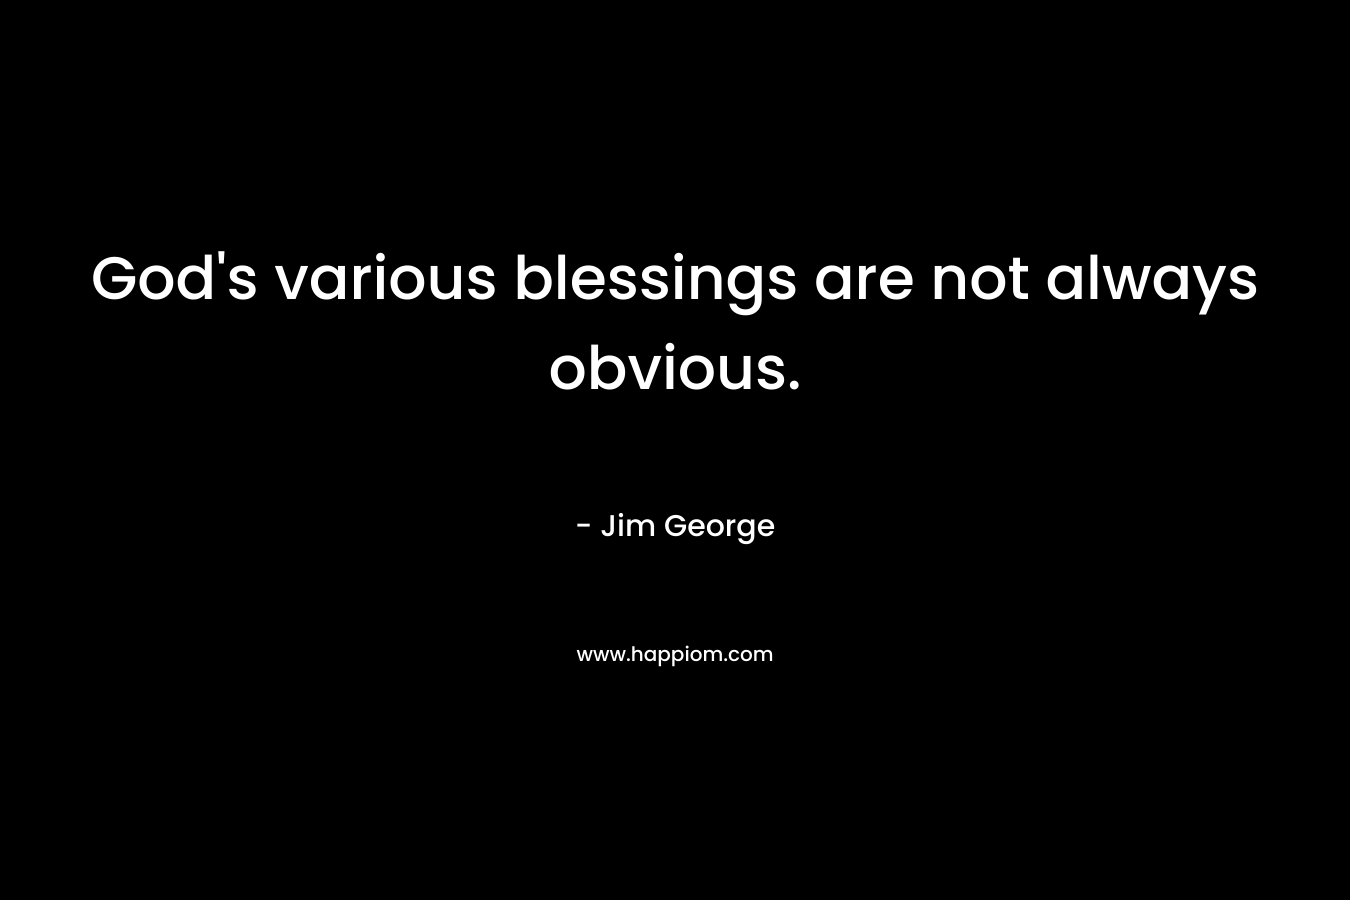 God's various blessings are not always obvious.